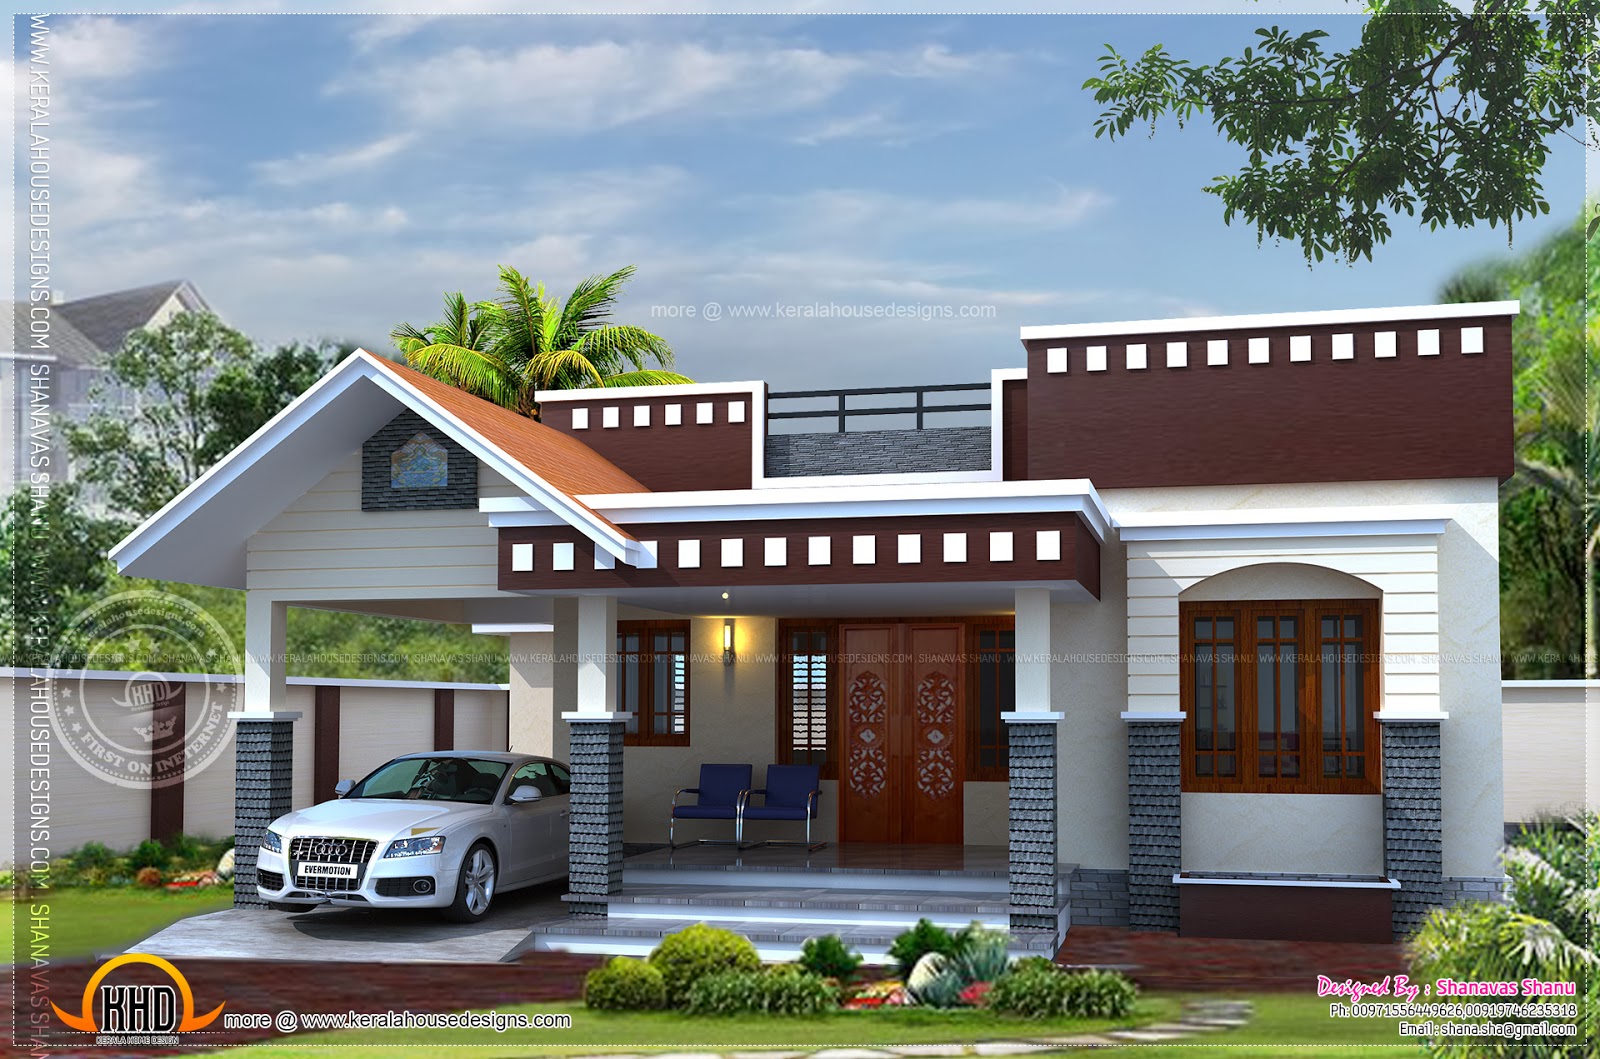 Home plan of small house - Kerala home design and floor plans